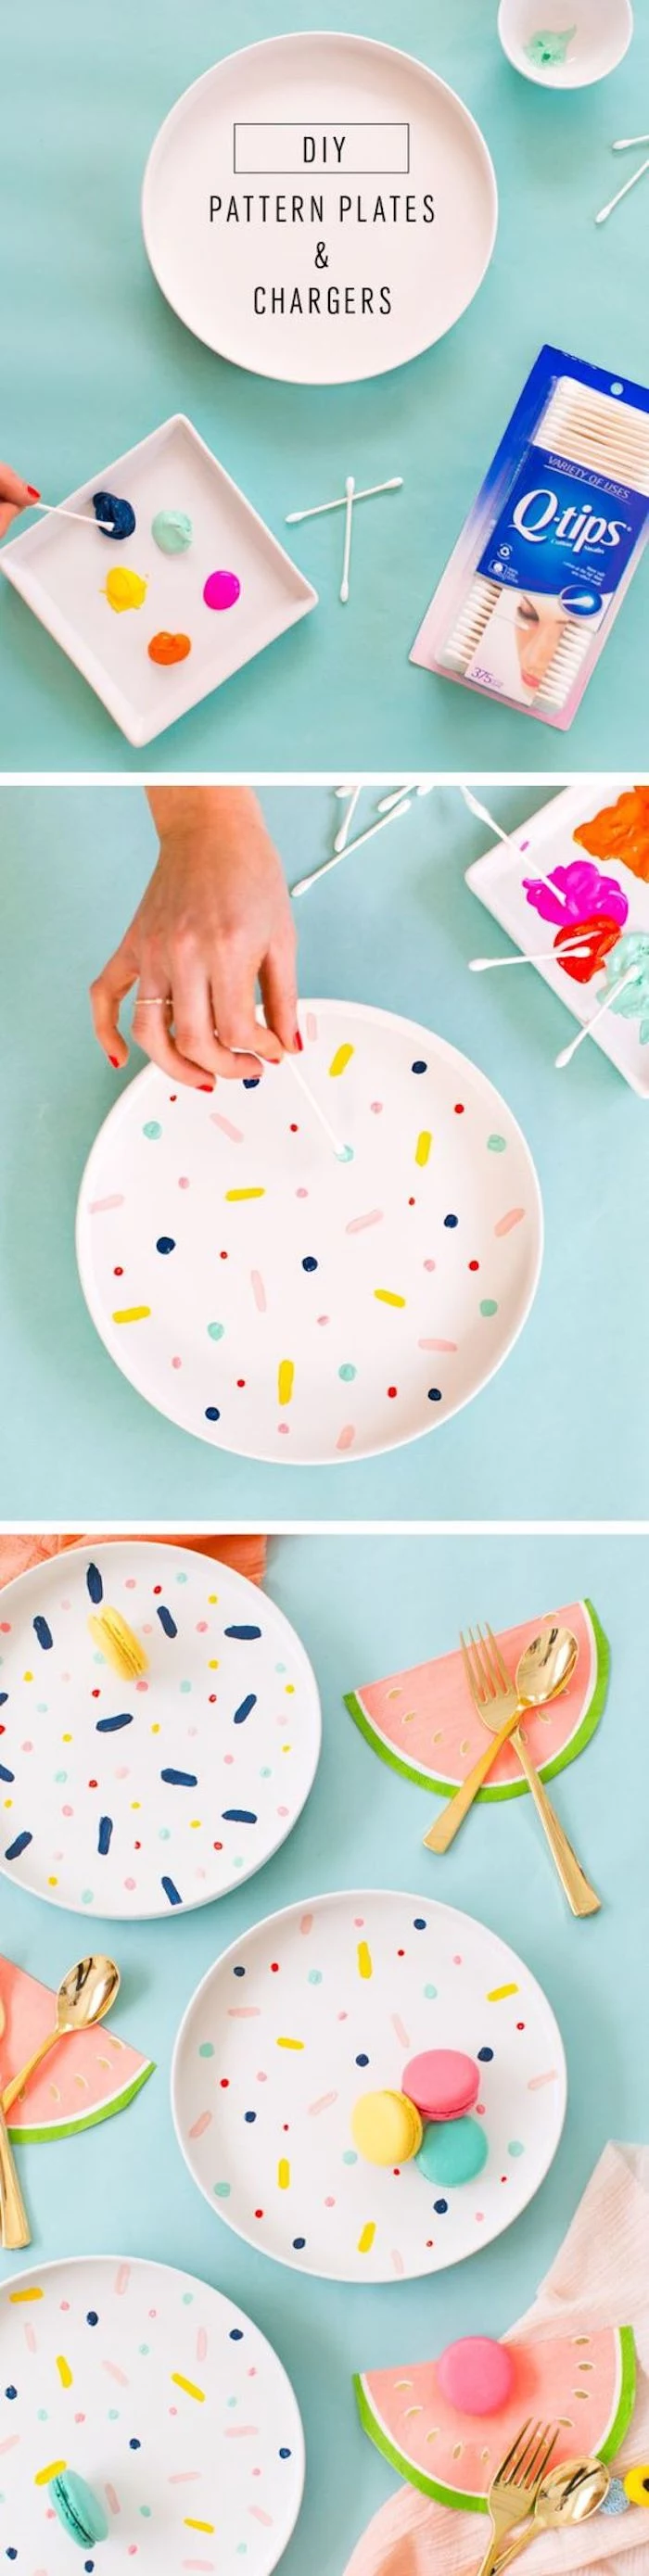 diy pattern plates, crafts to do when bored, yellow and blue, red and orange paint